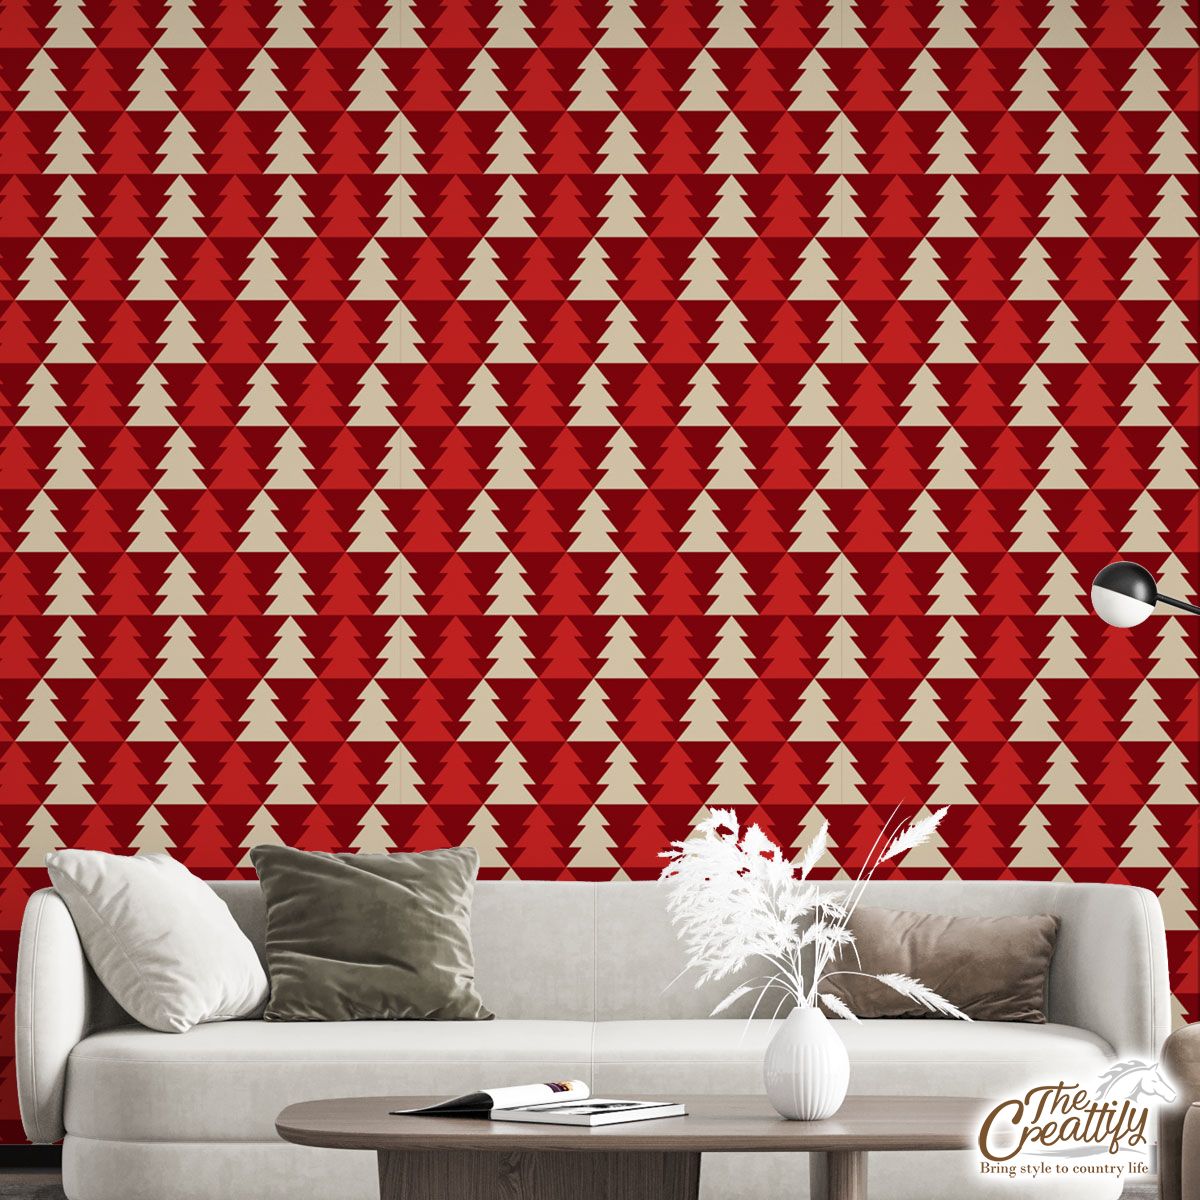 Red And White Pine Tree Silhouette Seamless Pattern Wall Mural